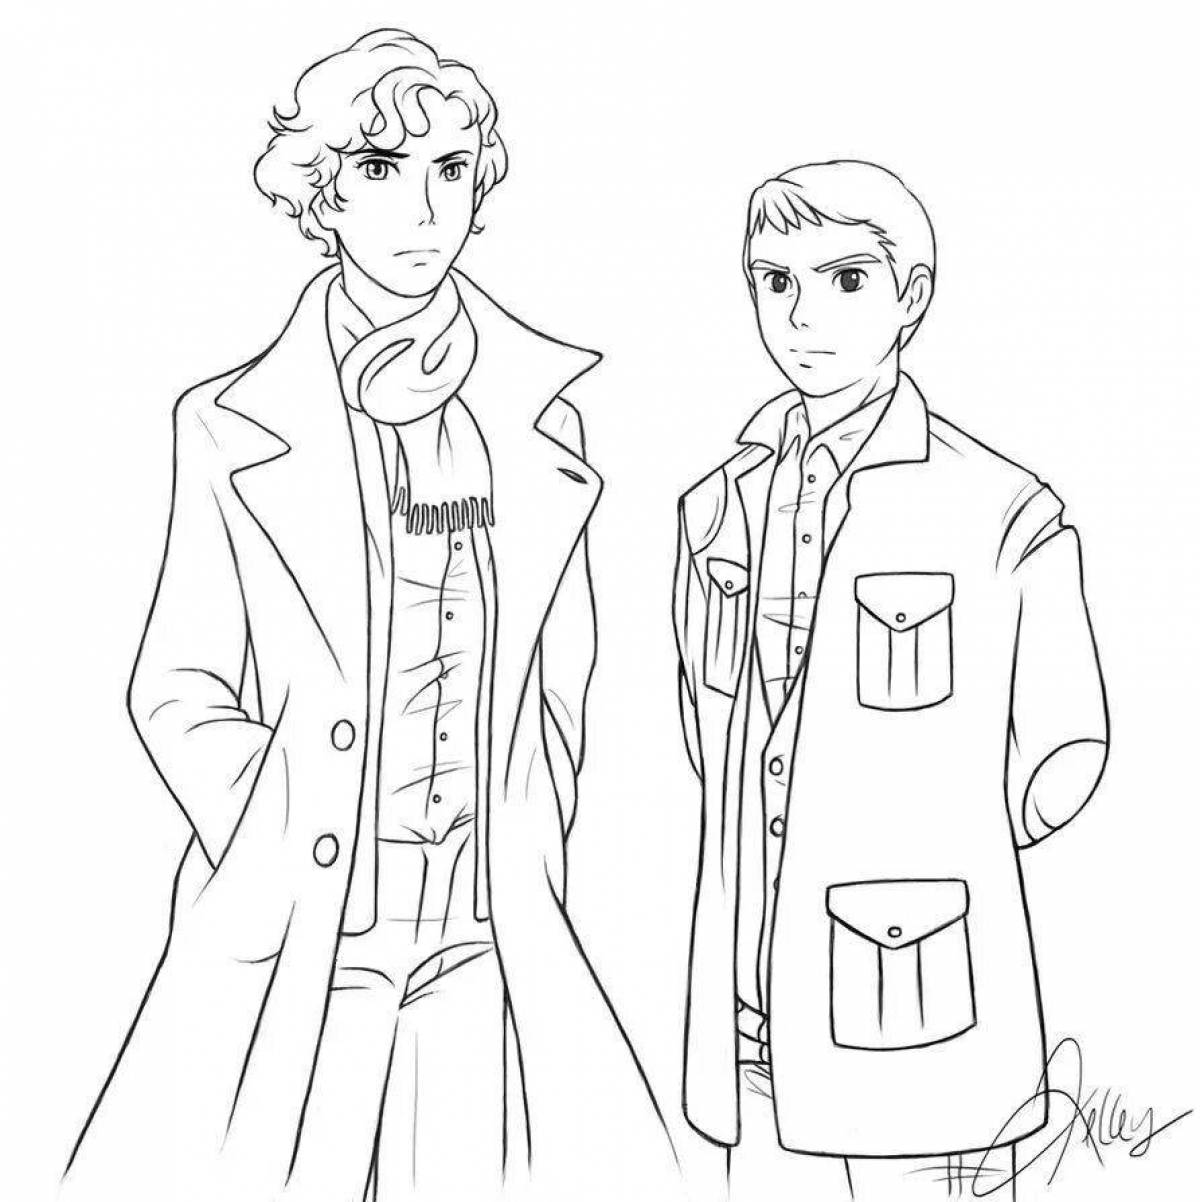 Colorful sherlock coloring page